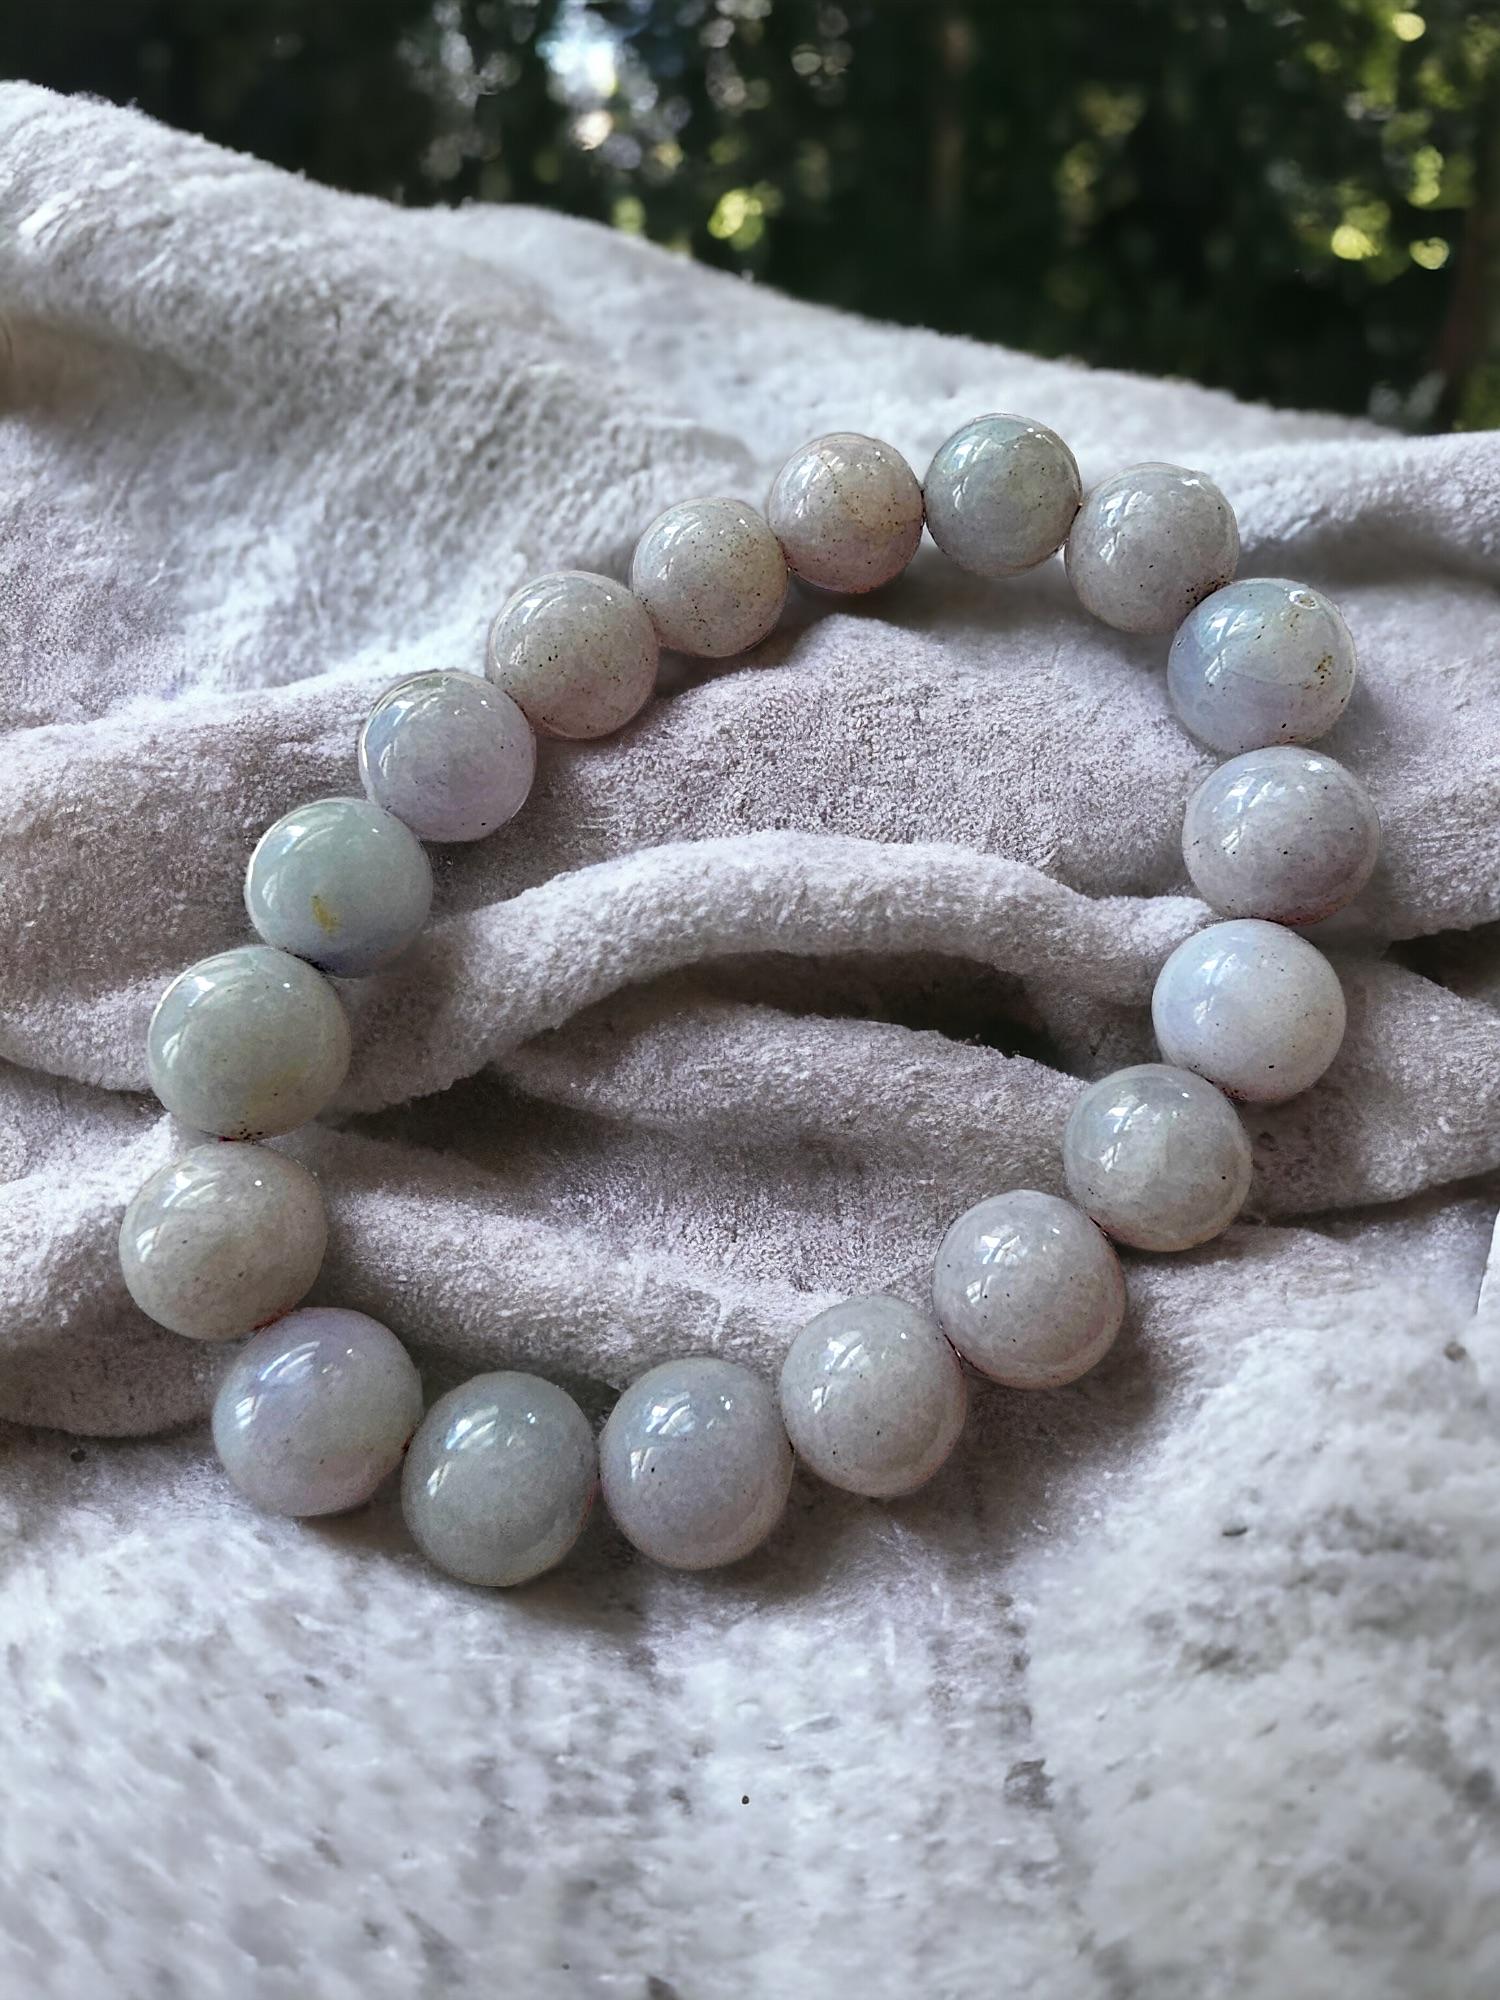 Imperial Purple Lavender Burmese A-Jade Beaded Bracelet (10-10.5mm Each x 18 beads) 06005

10-10.5mm each, 18 perfectly calibrated Lavender and Green Jadeite Beads. Some of the rarest naturally occurring hues of Jadeite, with superior translucency,